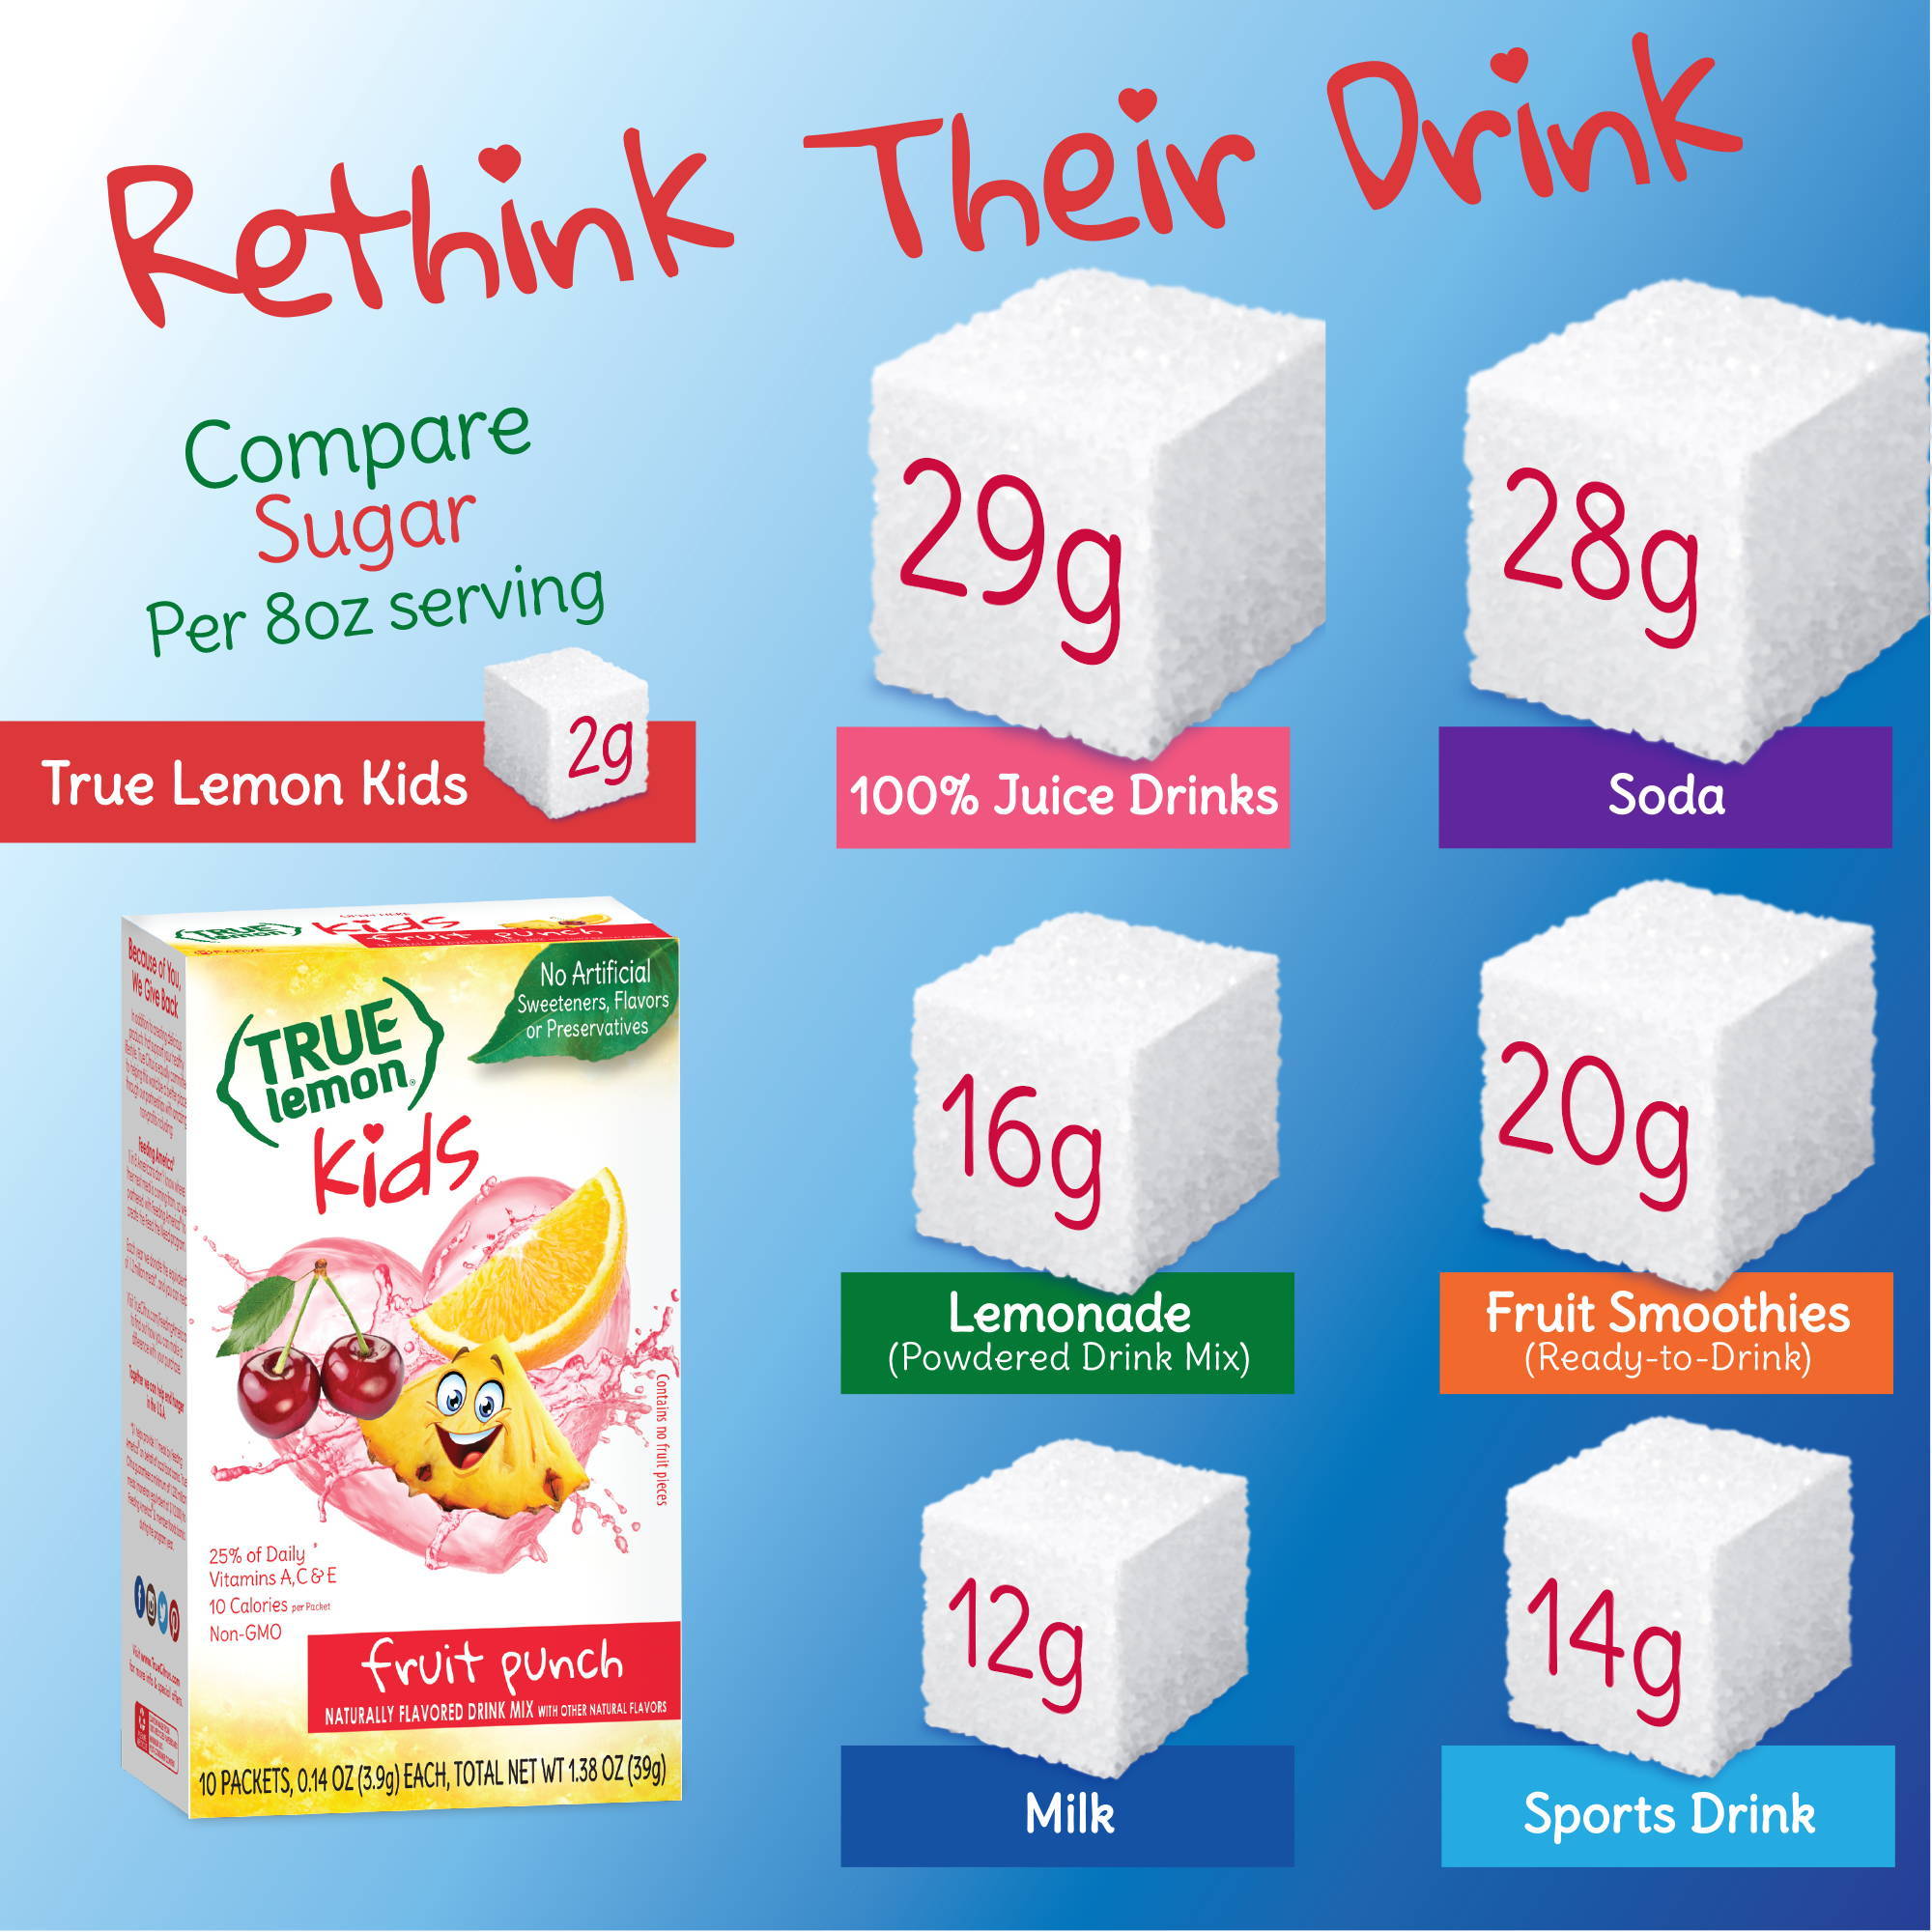 Comparing sugar per 8 ounce serving of true lemon kids kids with other common kids' drinks. True Lemon Kids has at least 92% less sugar. True Lemon Kids has just two grams of sugar per eight ounce drink versus twenty nine grams for hundred percent juice drinks, twenty eight grams for soda, sixteen grams for lemonade powdered drink mix, 20 grams for fruit smoothies, 12 grams for milk, and 14 grams for sports drinks.